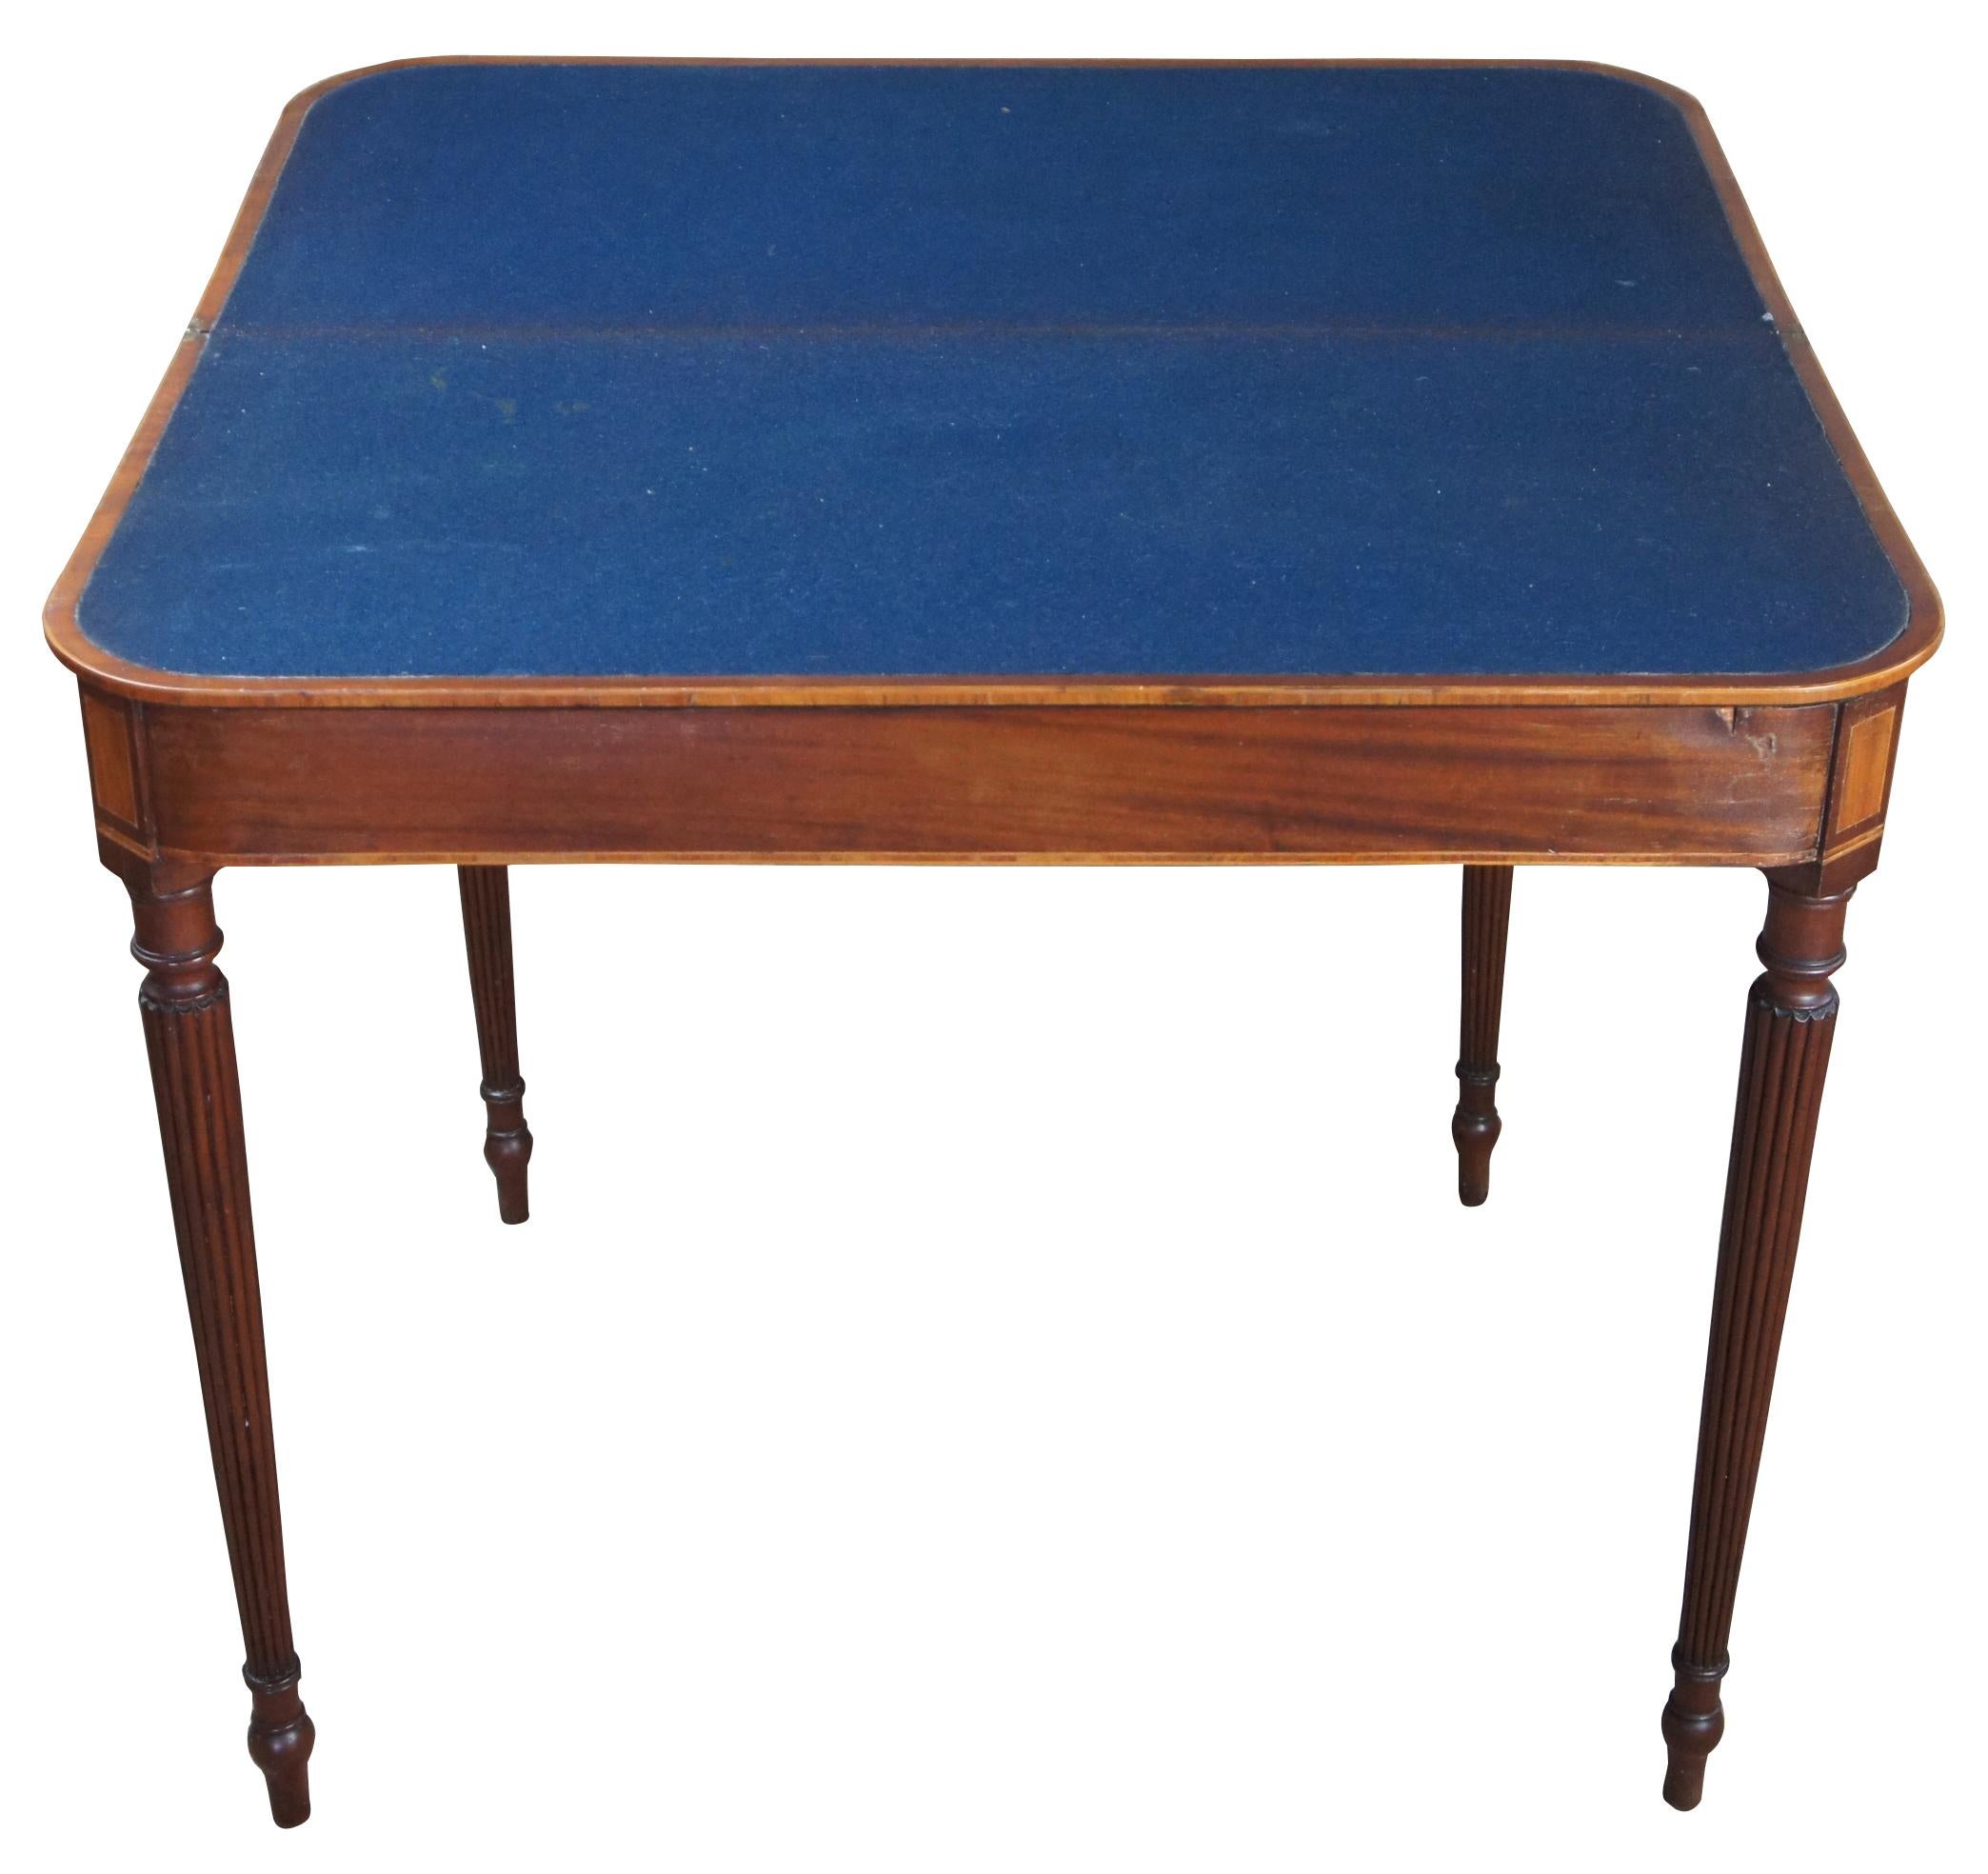 Early 19th century American mahogany Sheraton console game table hall entryway

Mahogany Sheraton entryway console or card table, circa 1810s. Features banding and inlay over fluted and tapered legs Opens to blue baize felt top. Neat gate-leg